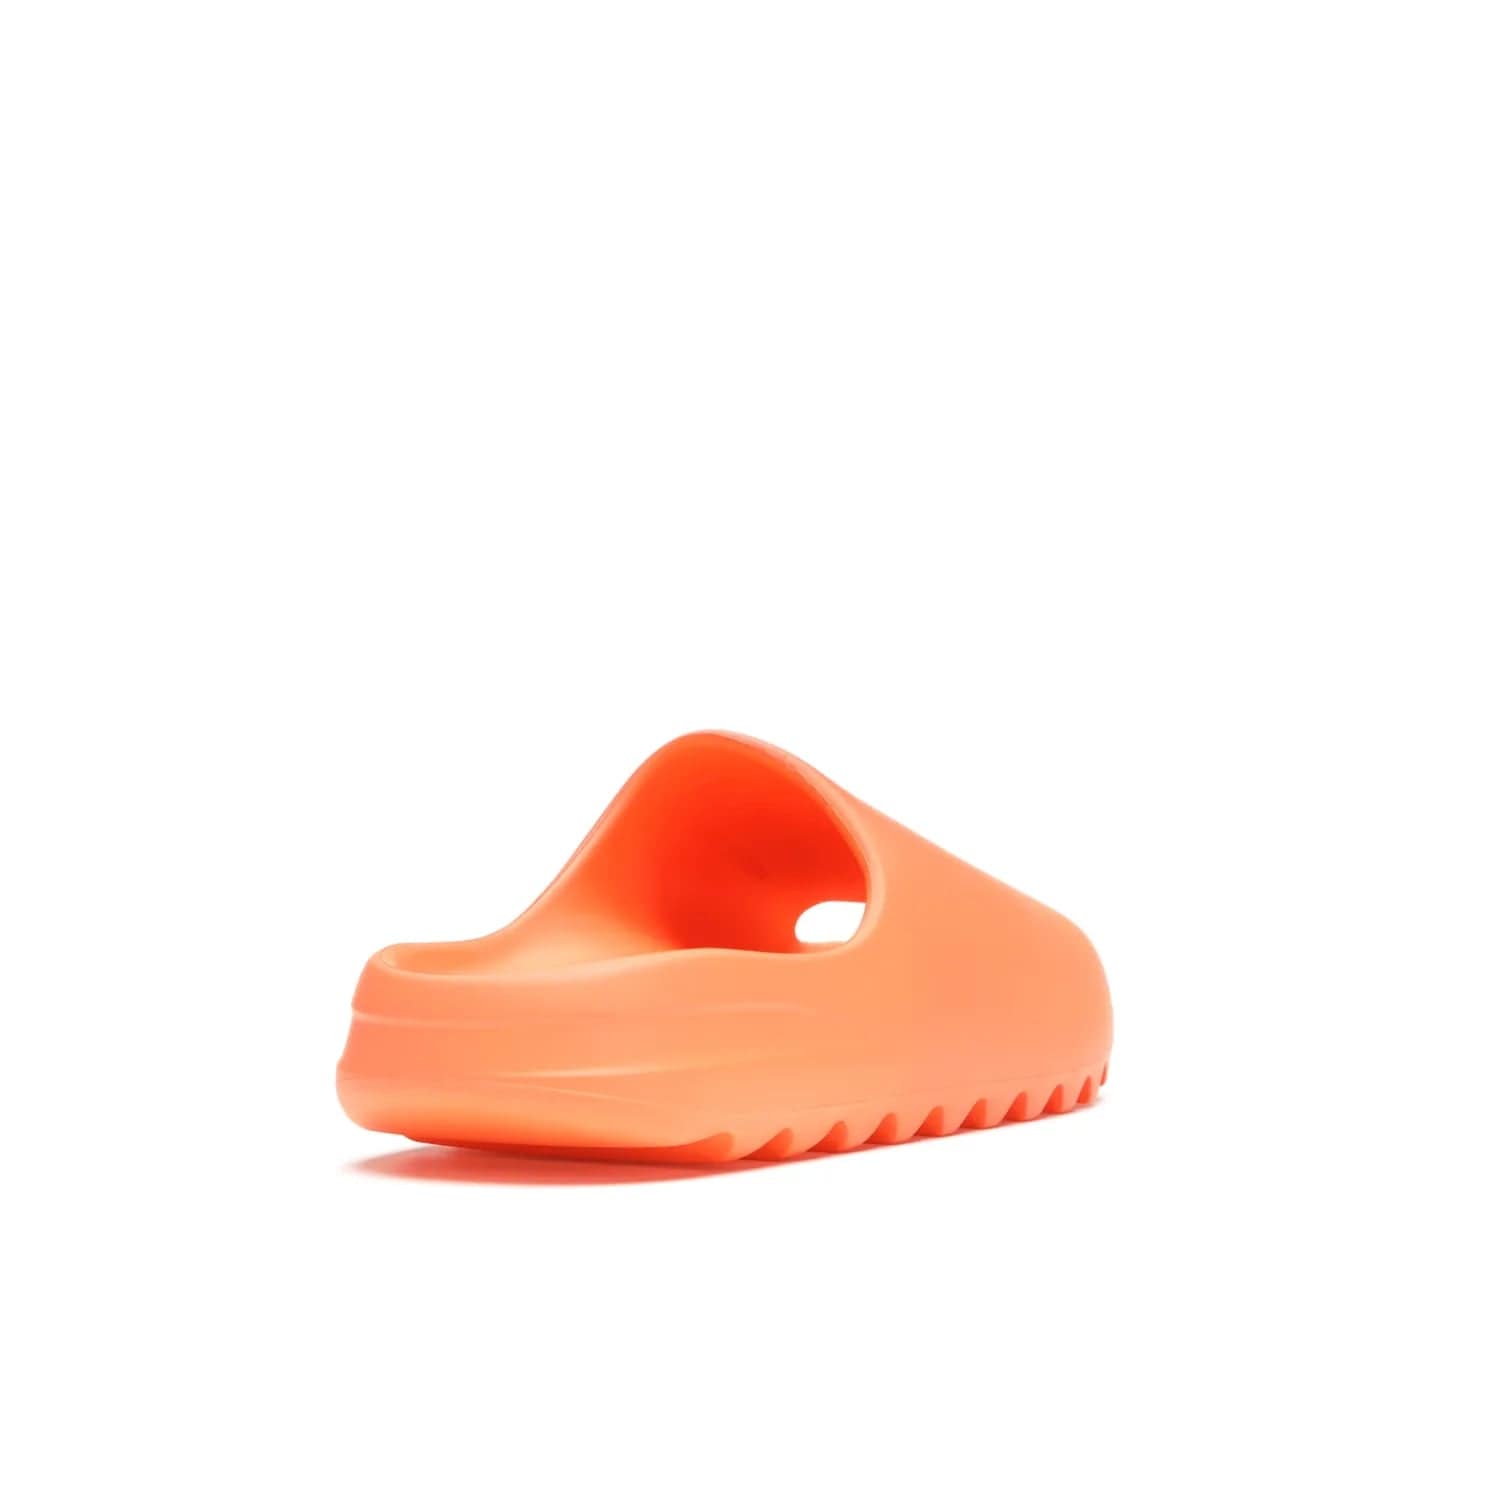 adidas Yeezy Slide Enflame Orange - Image 31 - Only at www.BallersClubKickz.com - Limited edition adidas Yeezy Slide featuring a bold Enflame Orange upper and EVA foam construction. Grooved outsole for traction and support. Released June 2021. Perfect for summer.